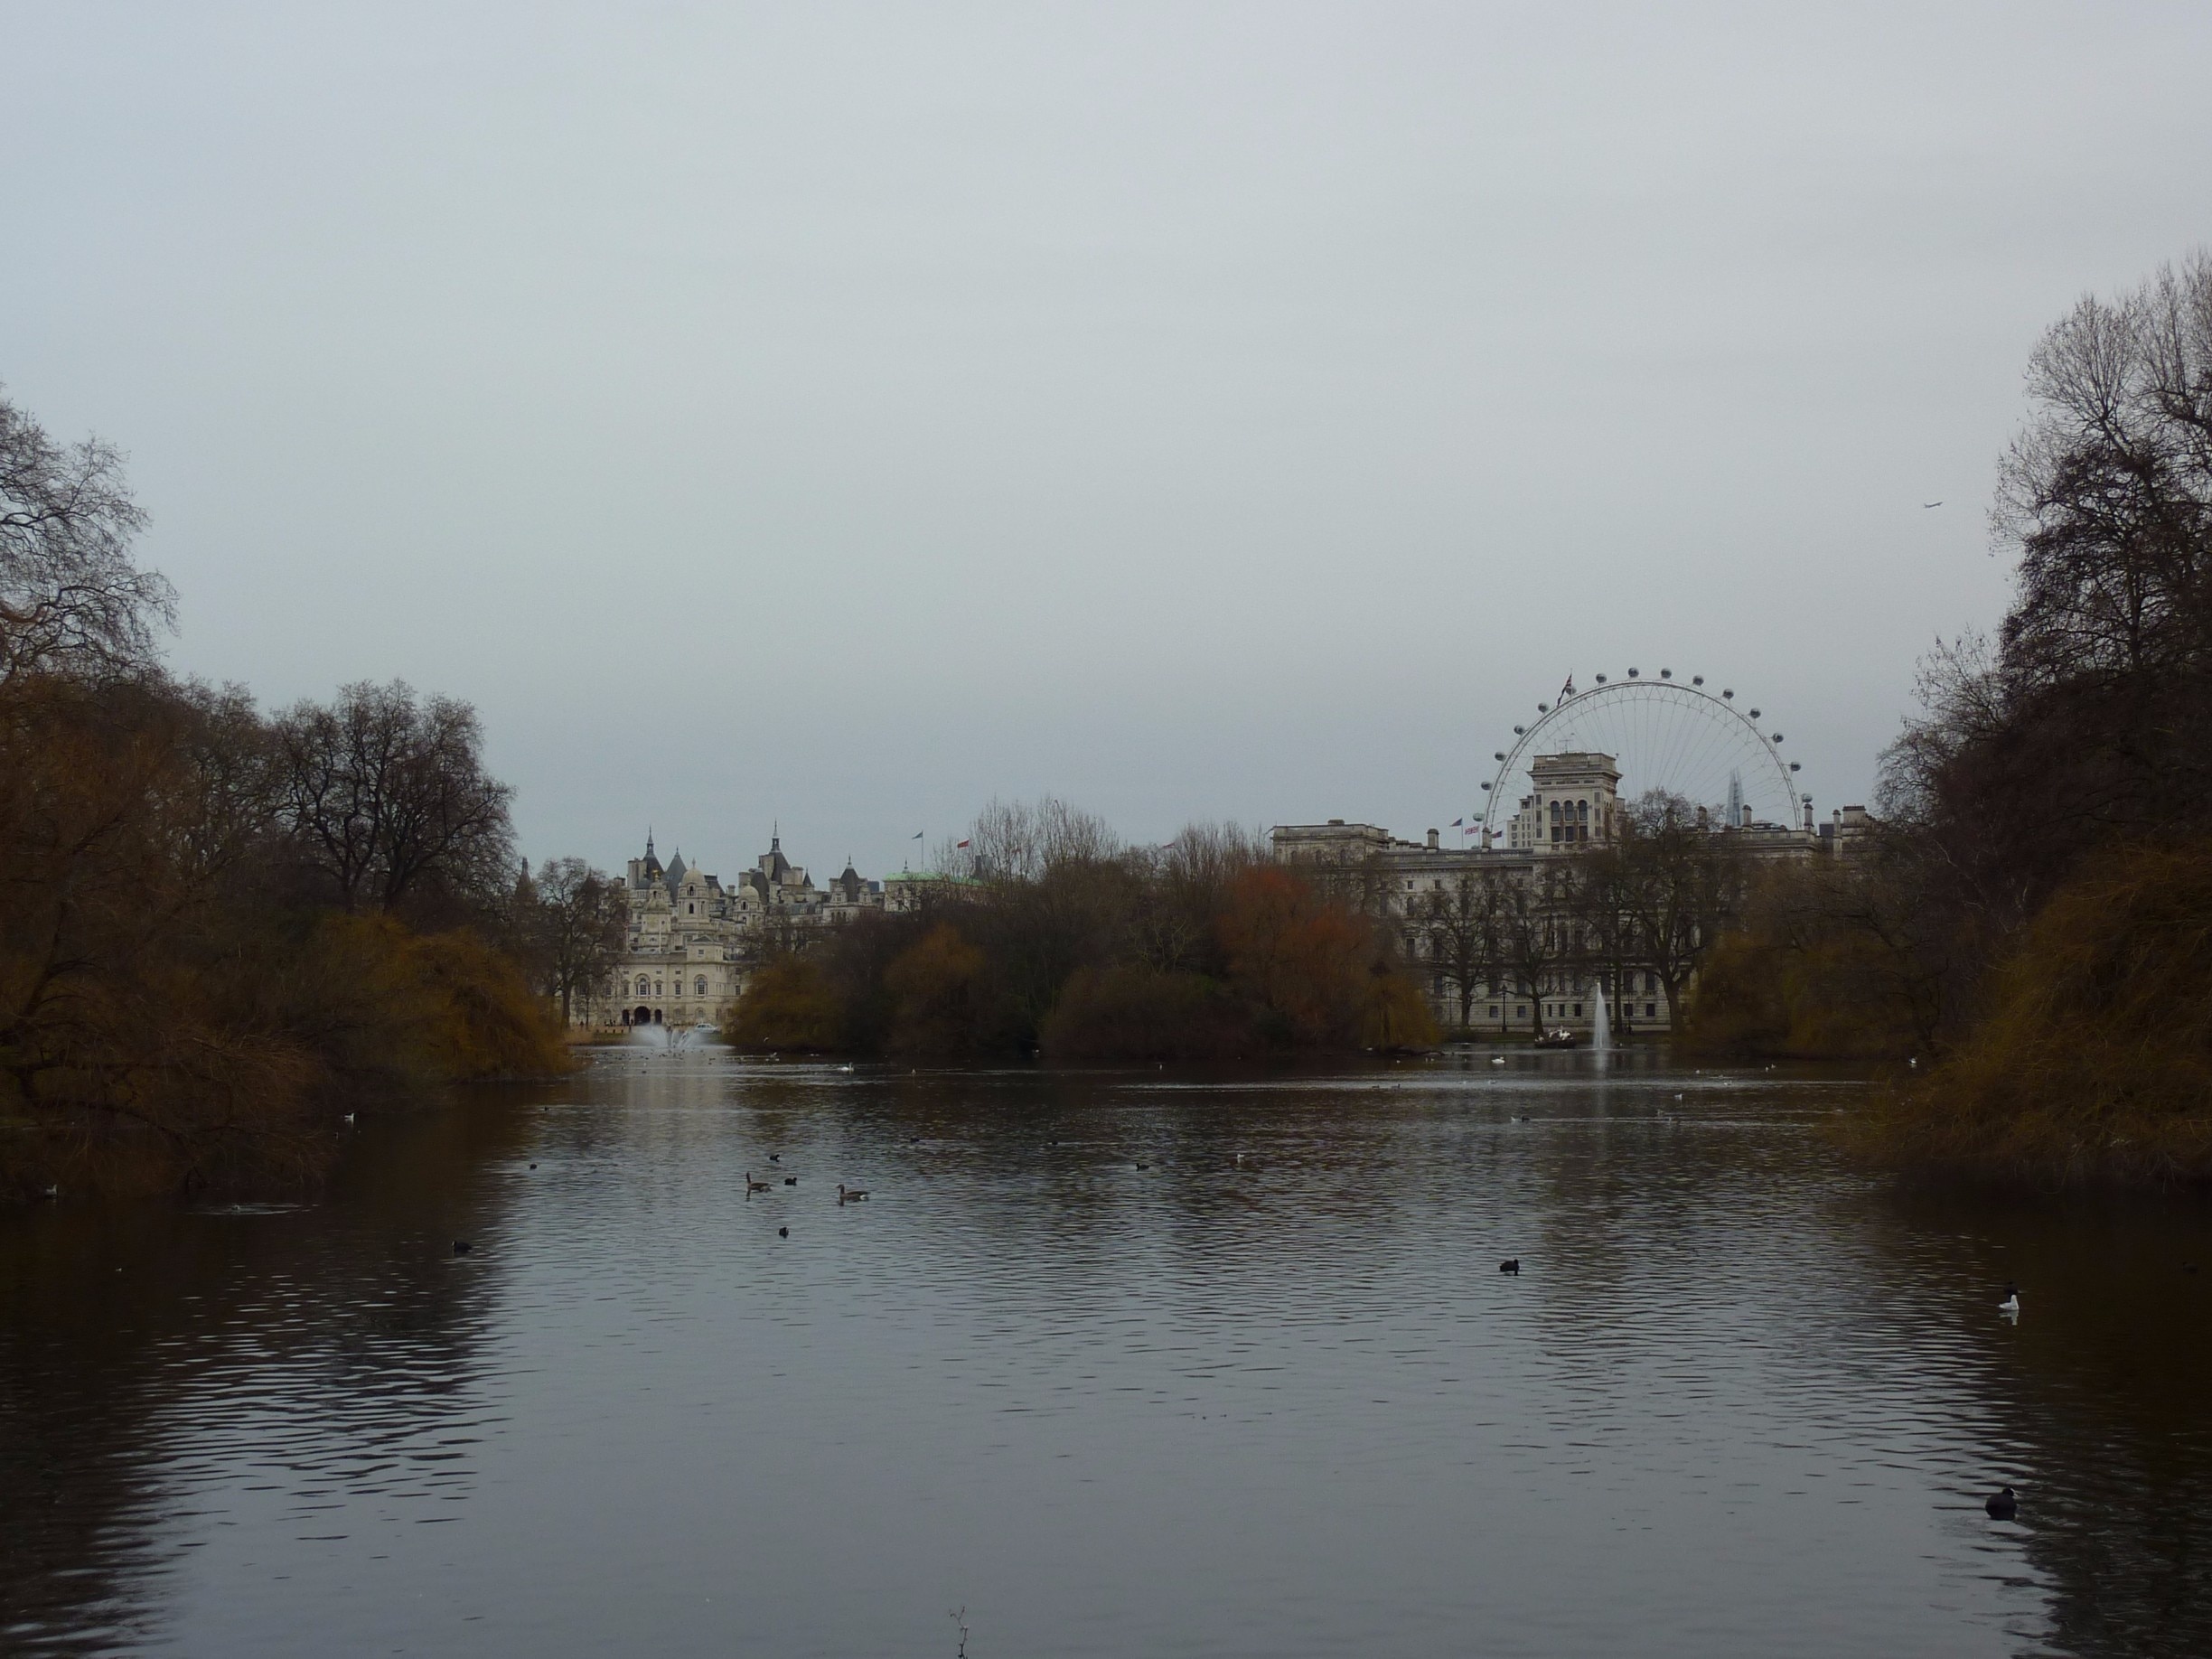 A walk through St James's Park on a typical cloudy London day